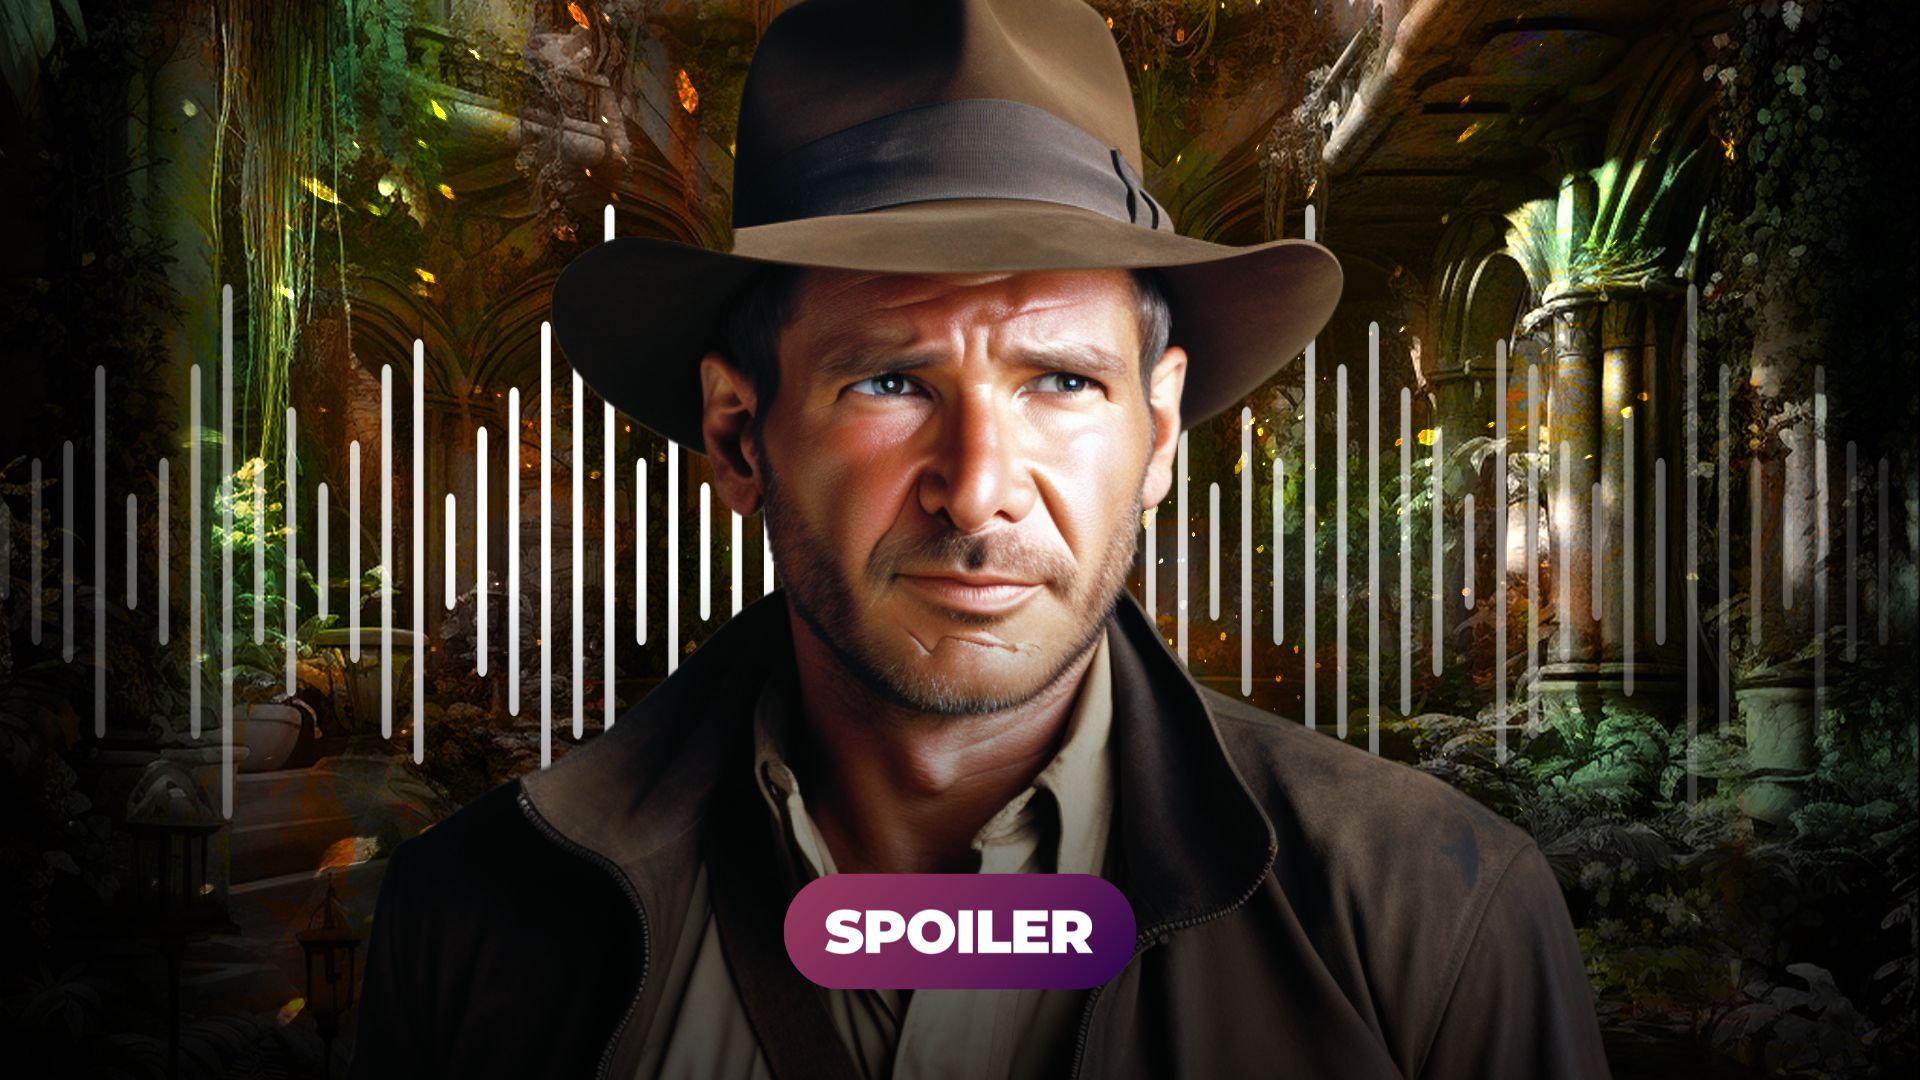 The New Indiana Jones: The Shocking Ending, But Harrison Ford Still Rolls